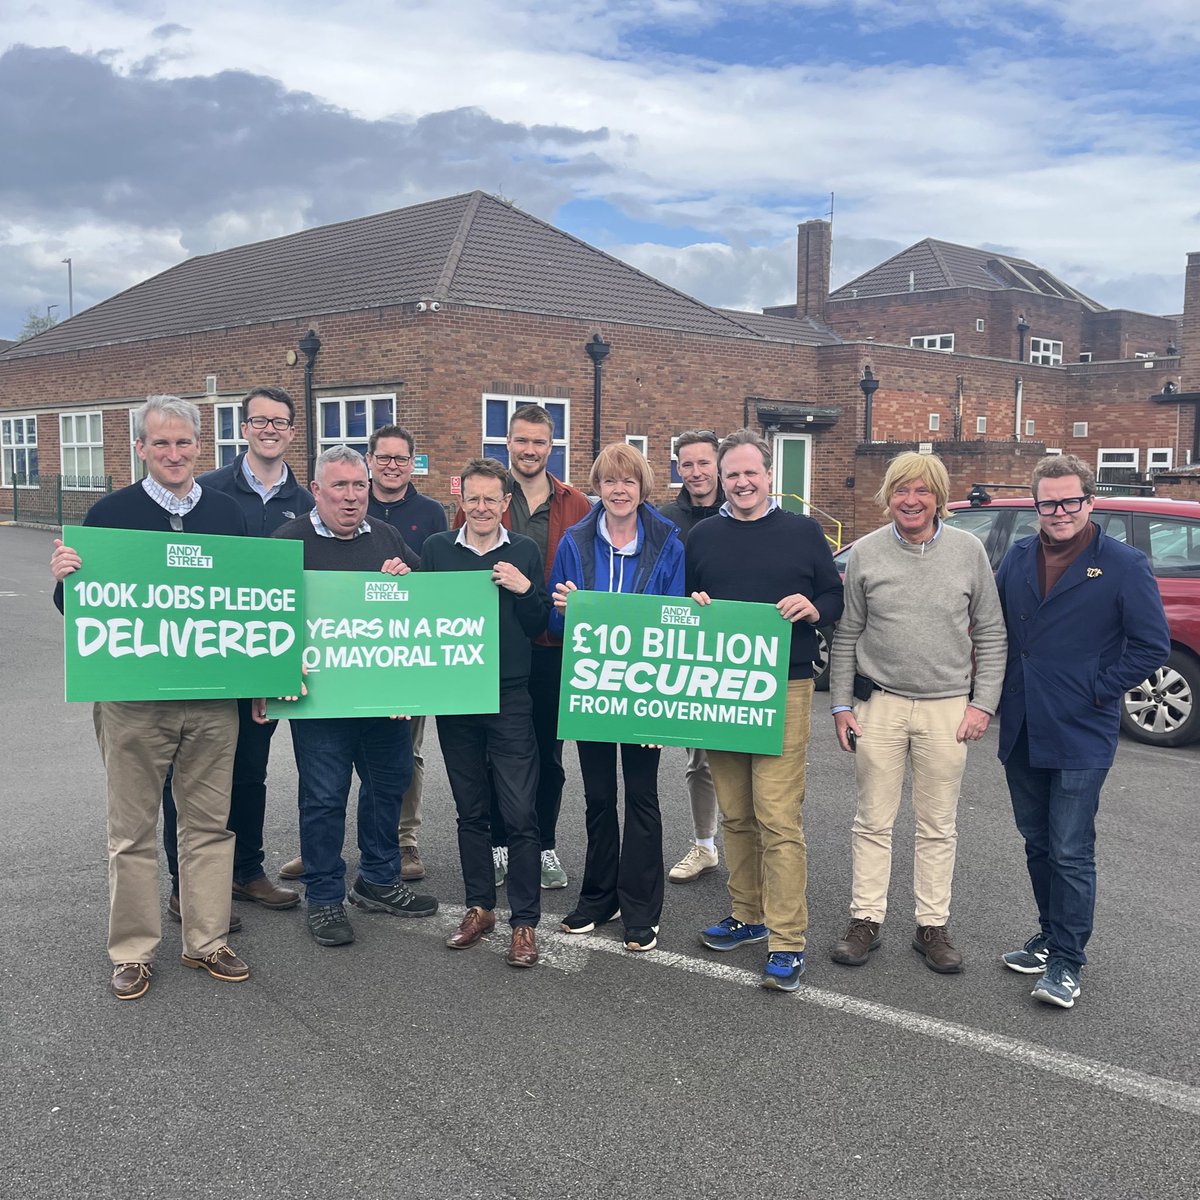 A busy weekend of campaigning across the West Midlands this weekend — speaking to residents about my plan to get a grip on crime and supporting @andy4wm & local candidates. Thank you to everyone who came to support us!